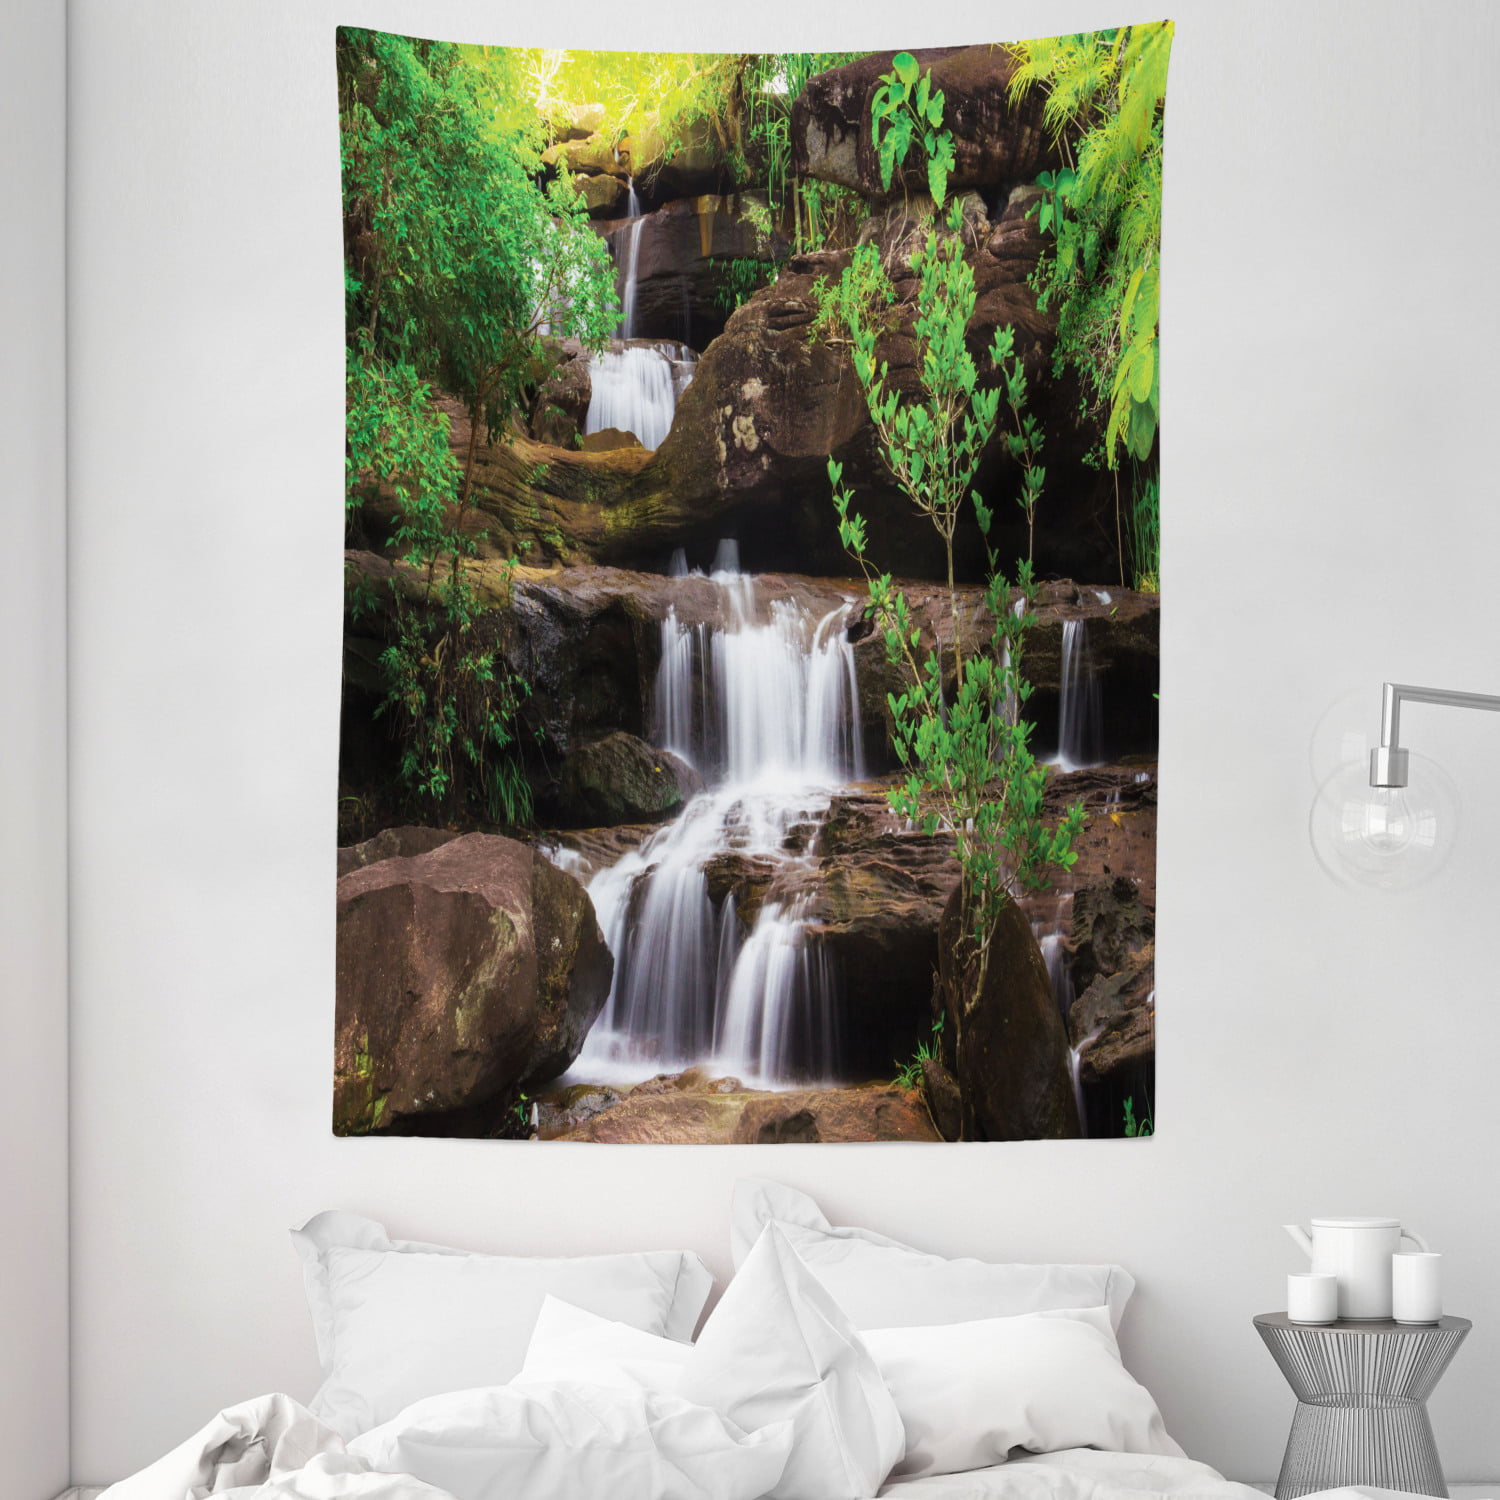 Waterfall Tapestry,Nature Tapestry,Beautiful Blue Sky Natural Scenery Nature Landscape Tapestry Wall Hanging,Art Wall Tapestry for Bedroom Aesthetic Teen Girl Men Room Decor College Dorm Large 80”x60” 